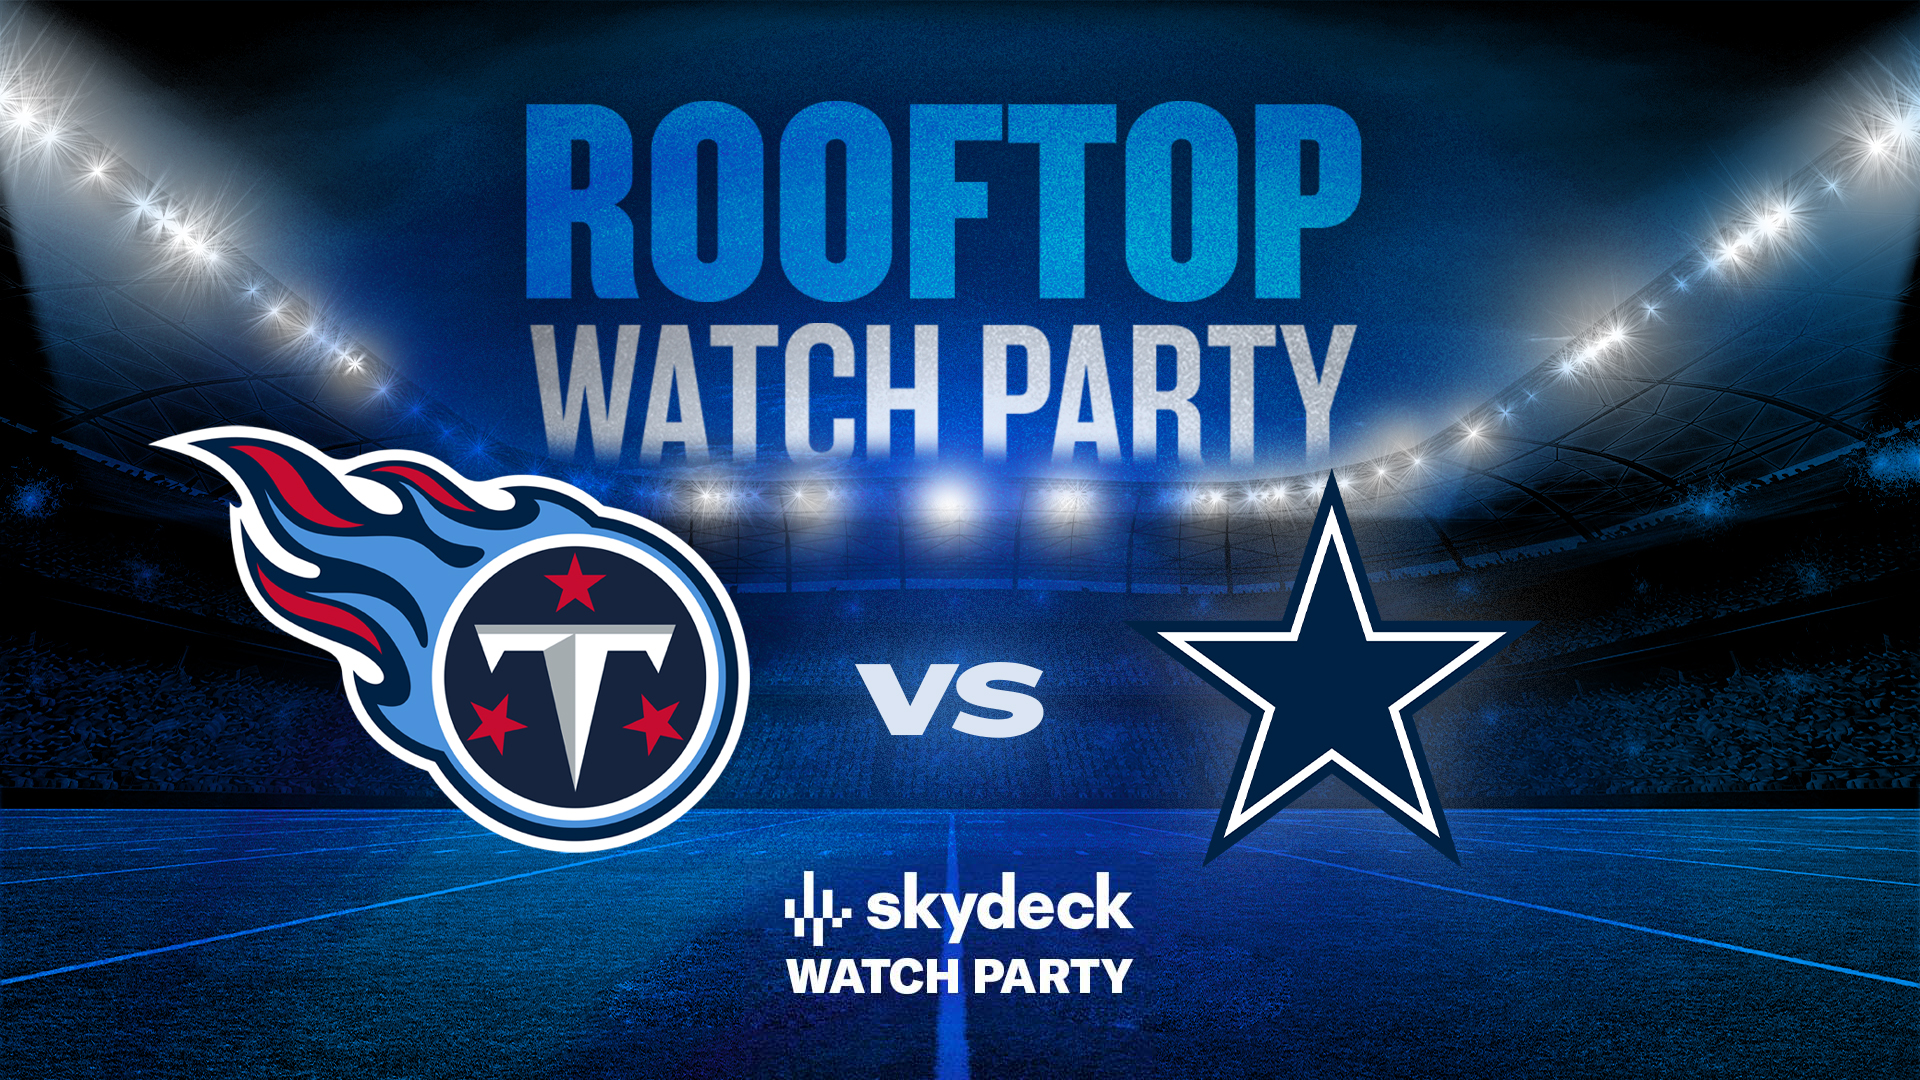 Promo image of Titans vs. Cowboys | Skydeck Watch Party